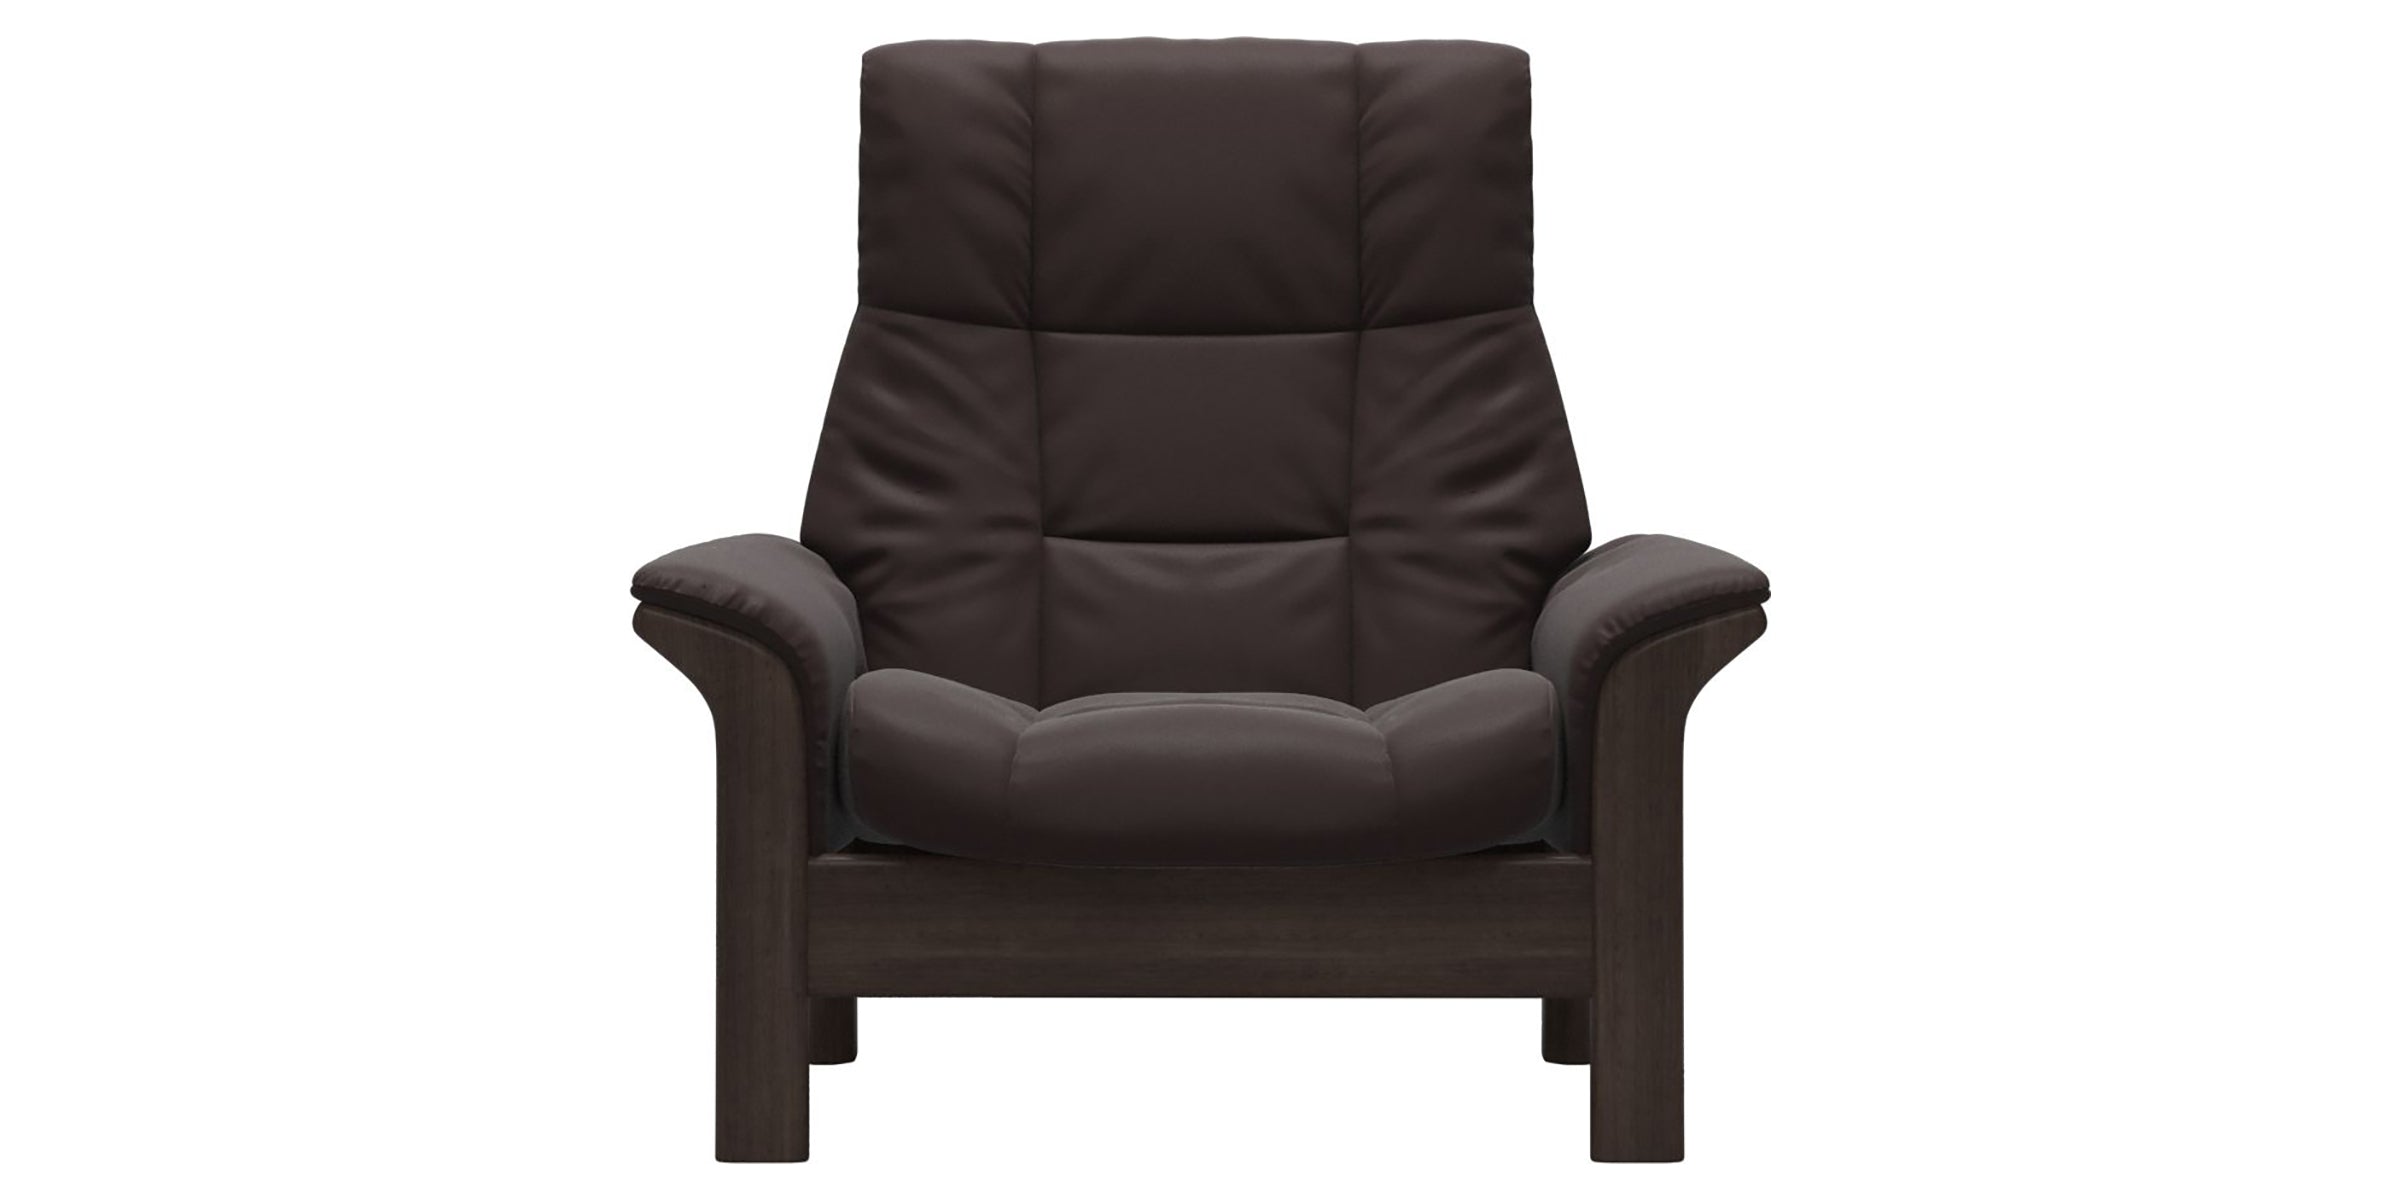 Paloma Leather Chocolate and Wenge Base | Stressless Buckingham High Back Chair | Valley Ridge Furniture